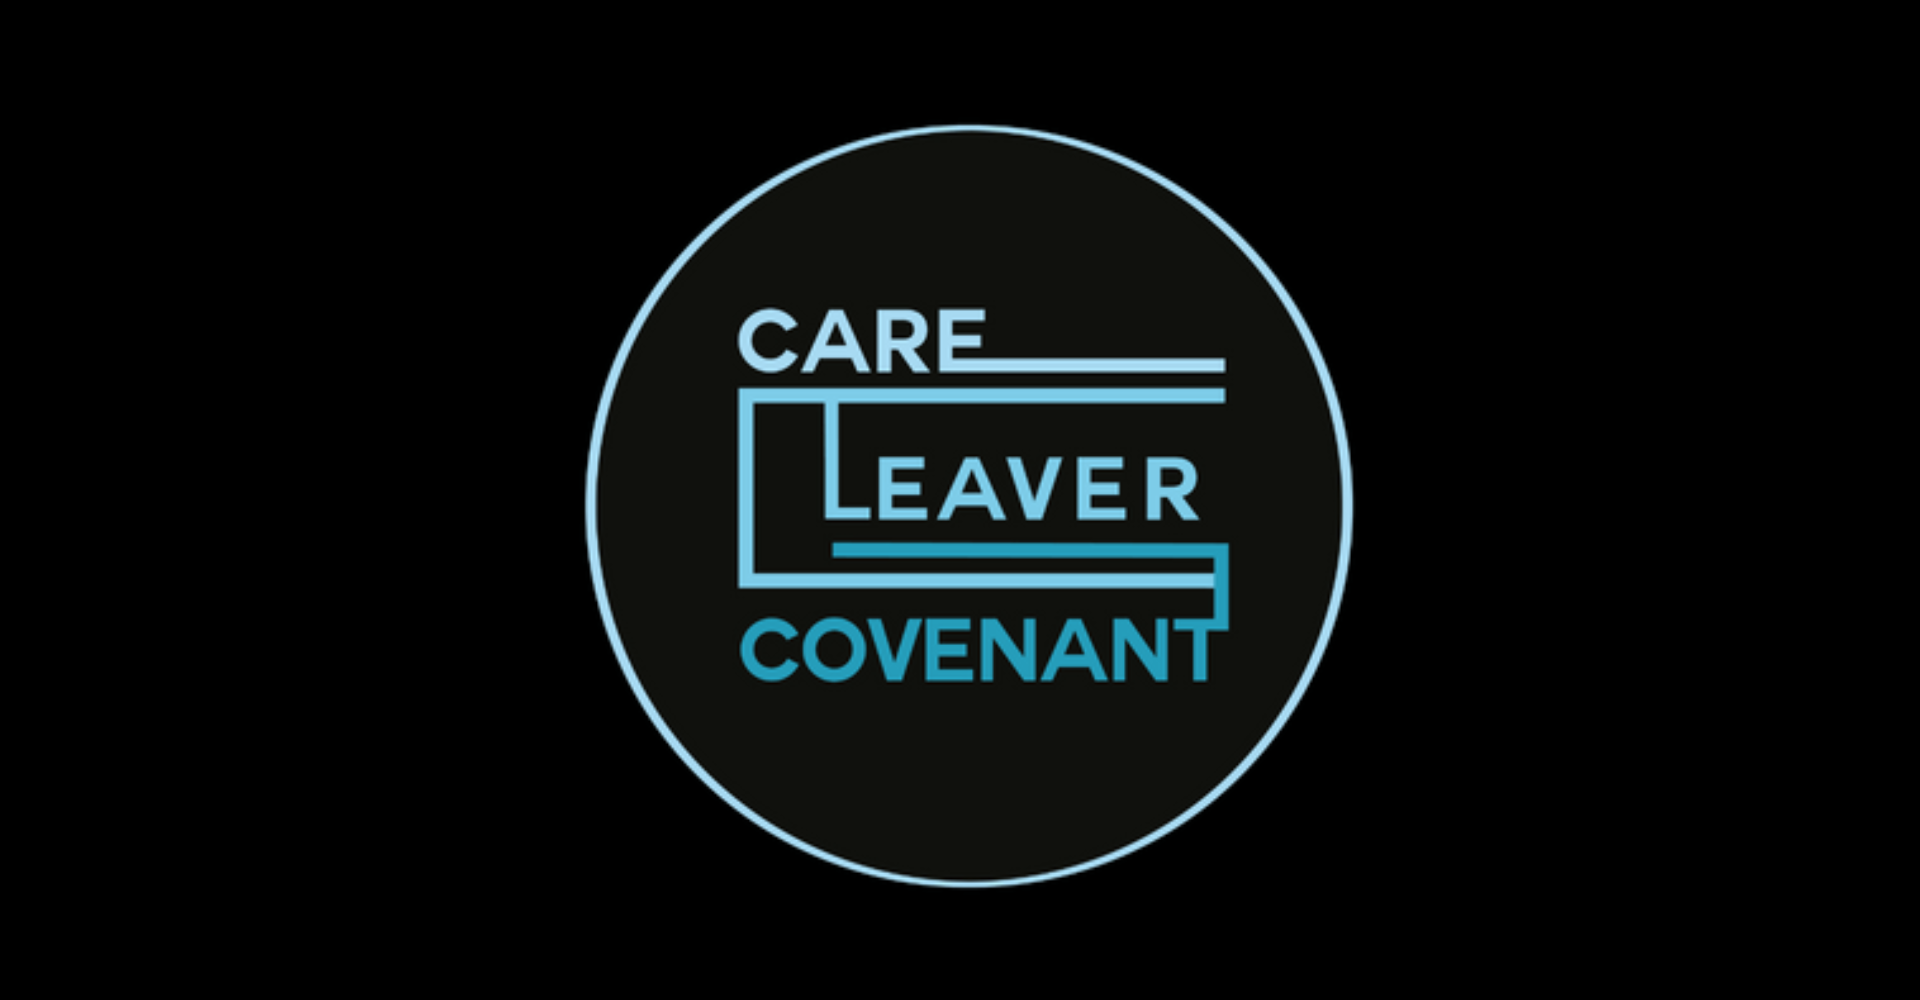 We have signed up to the Care Leaver Covenant